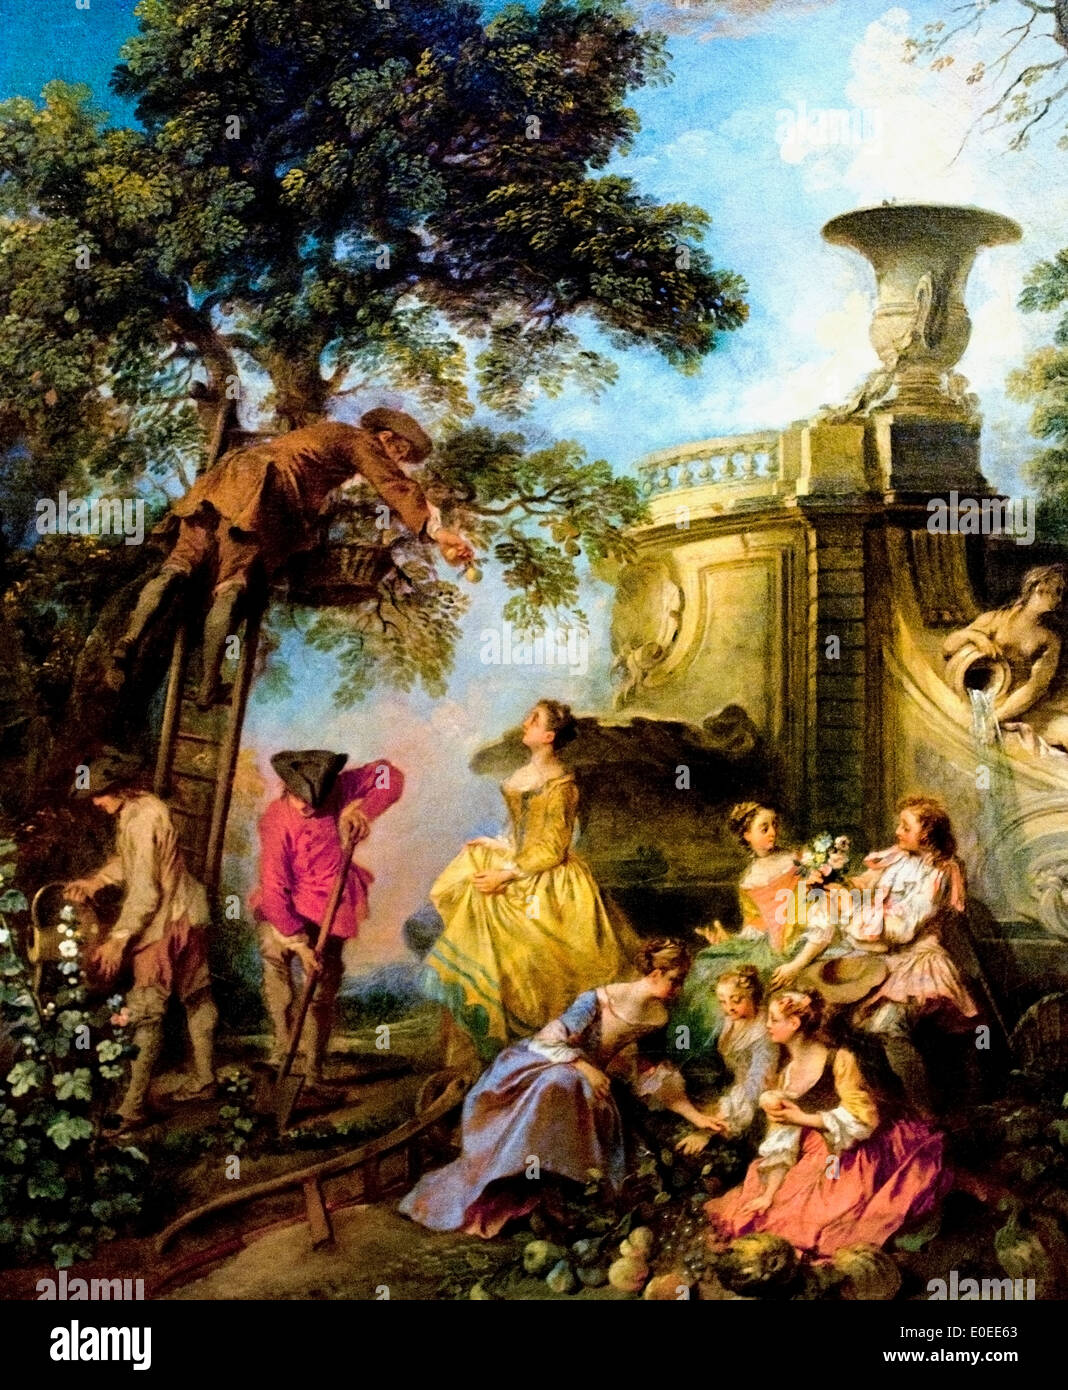 The Earth by Nicolas Lancret 1690-1743 France French Stock Photo - Alamy